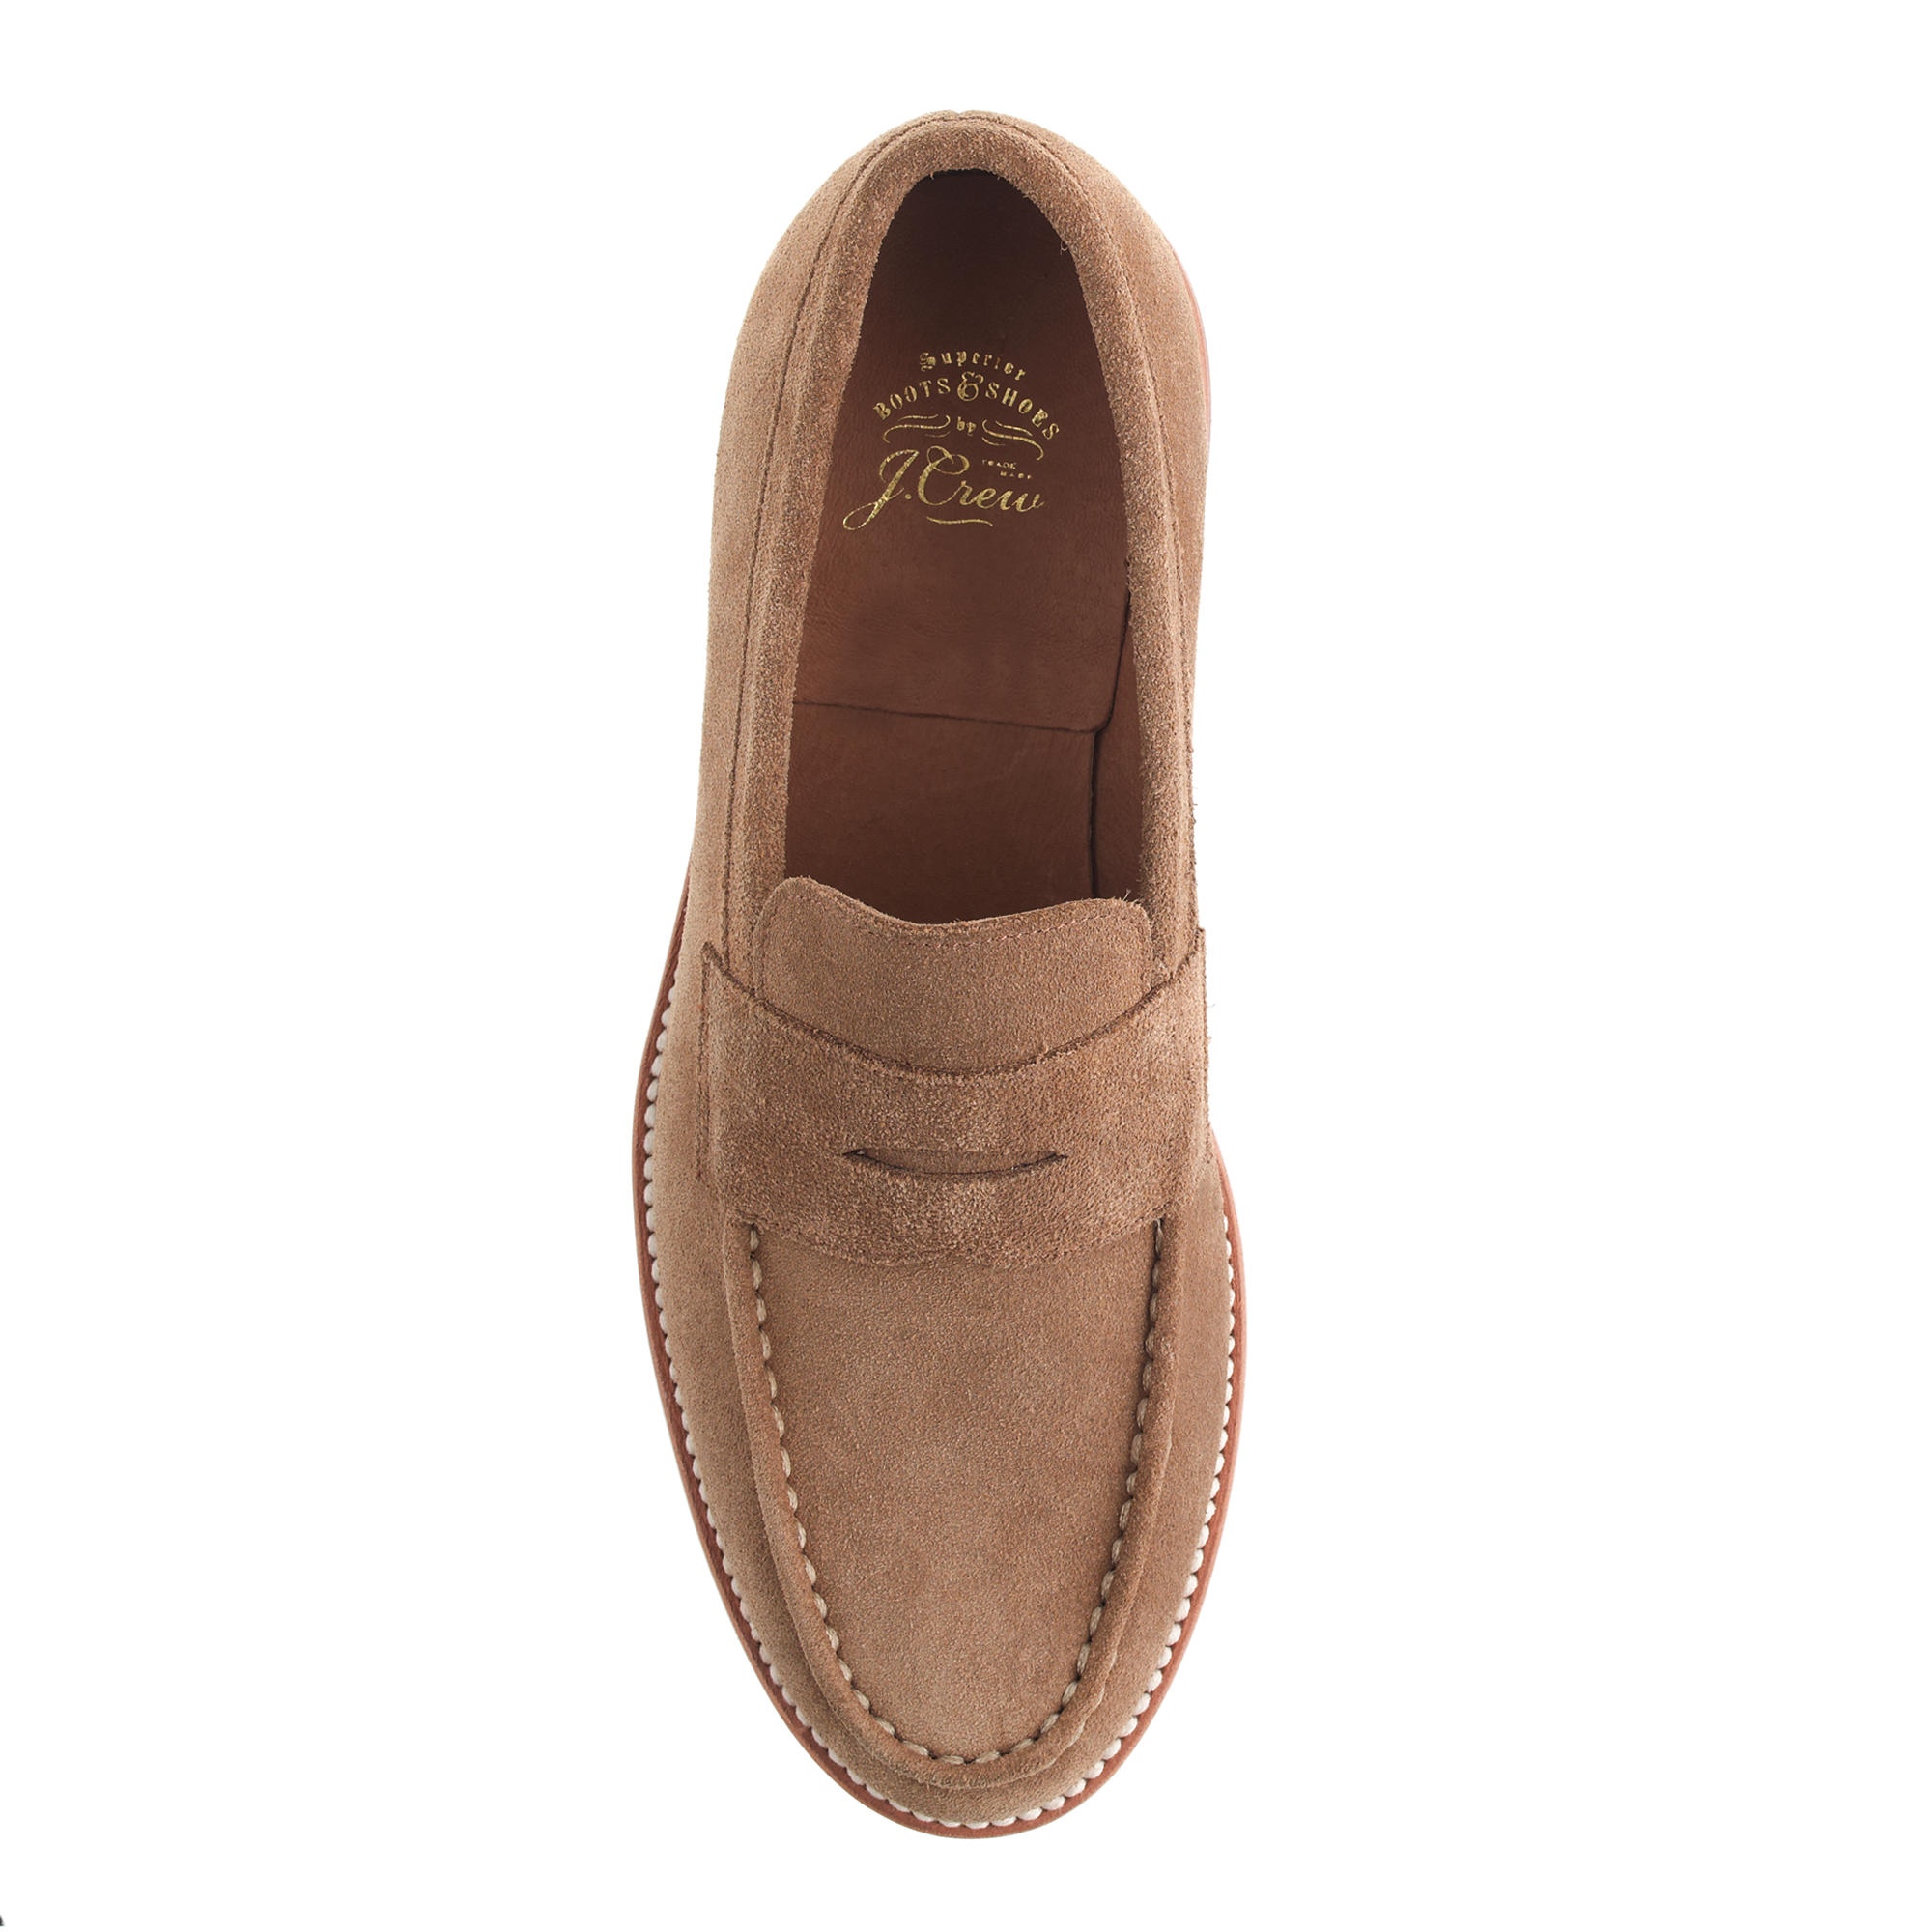 Jcrew Sahara Kenton Suede Penny Loafers Product 3 587022644 Normal 